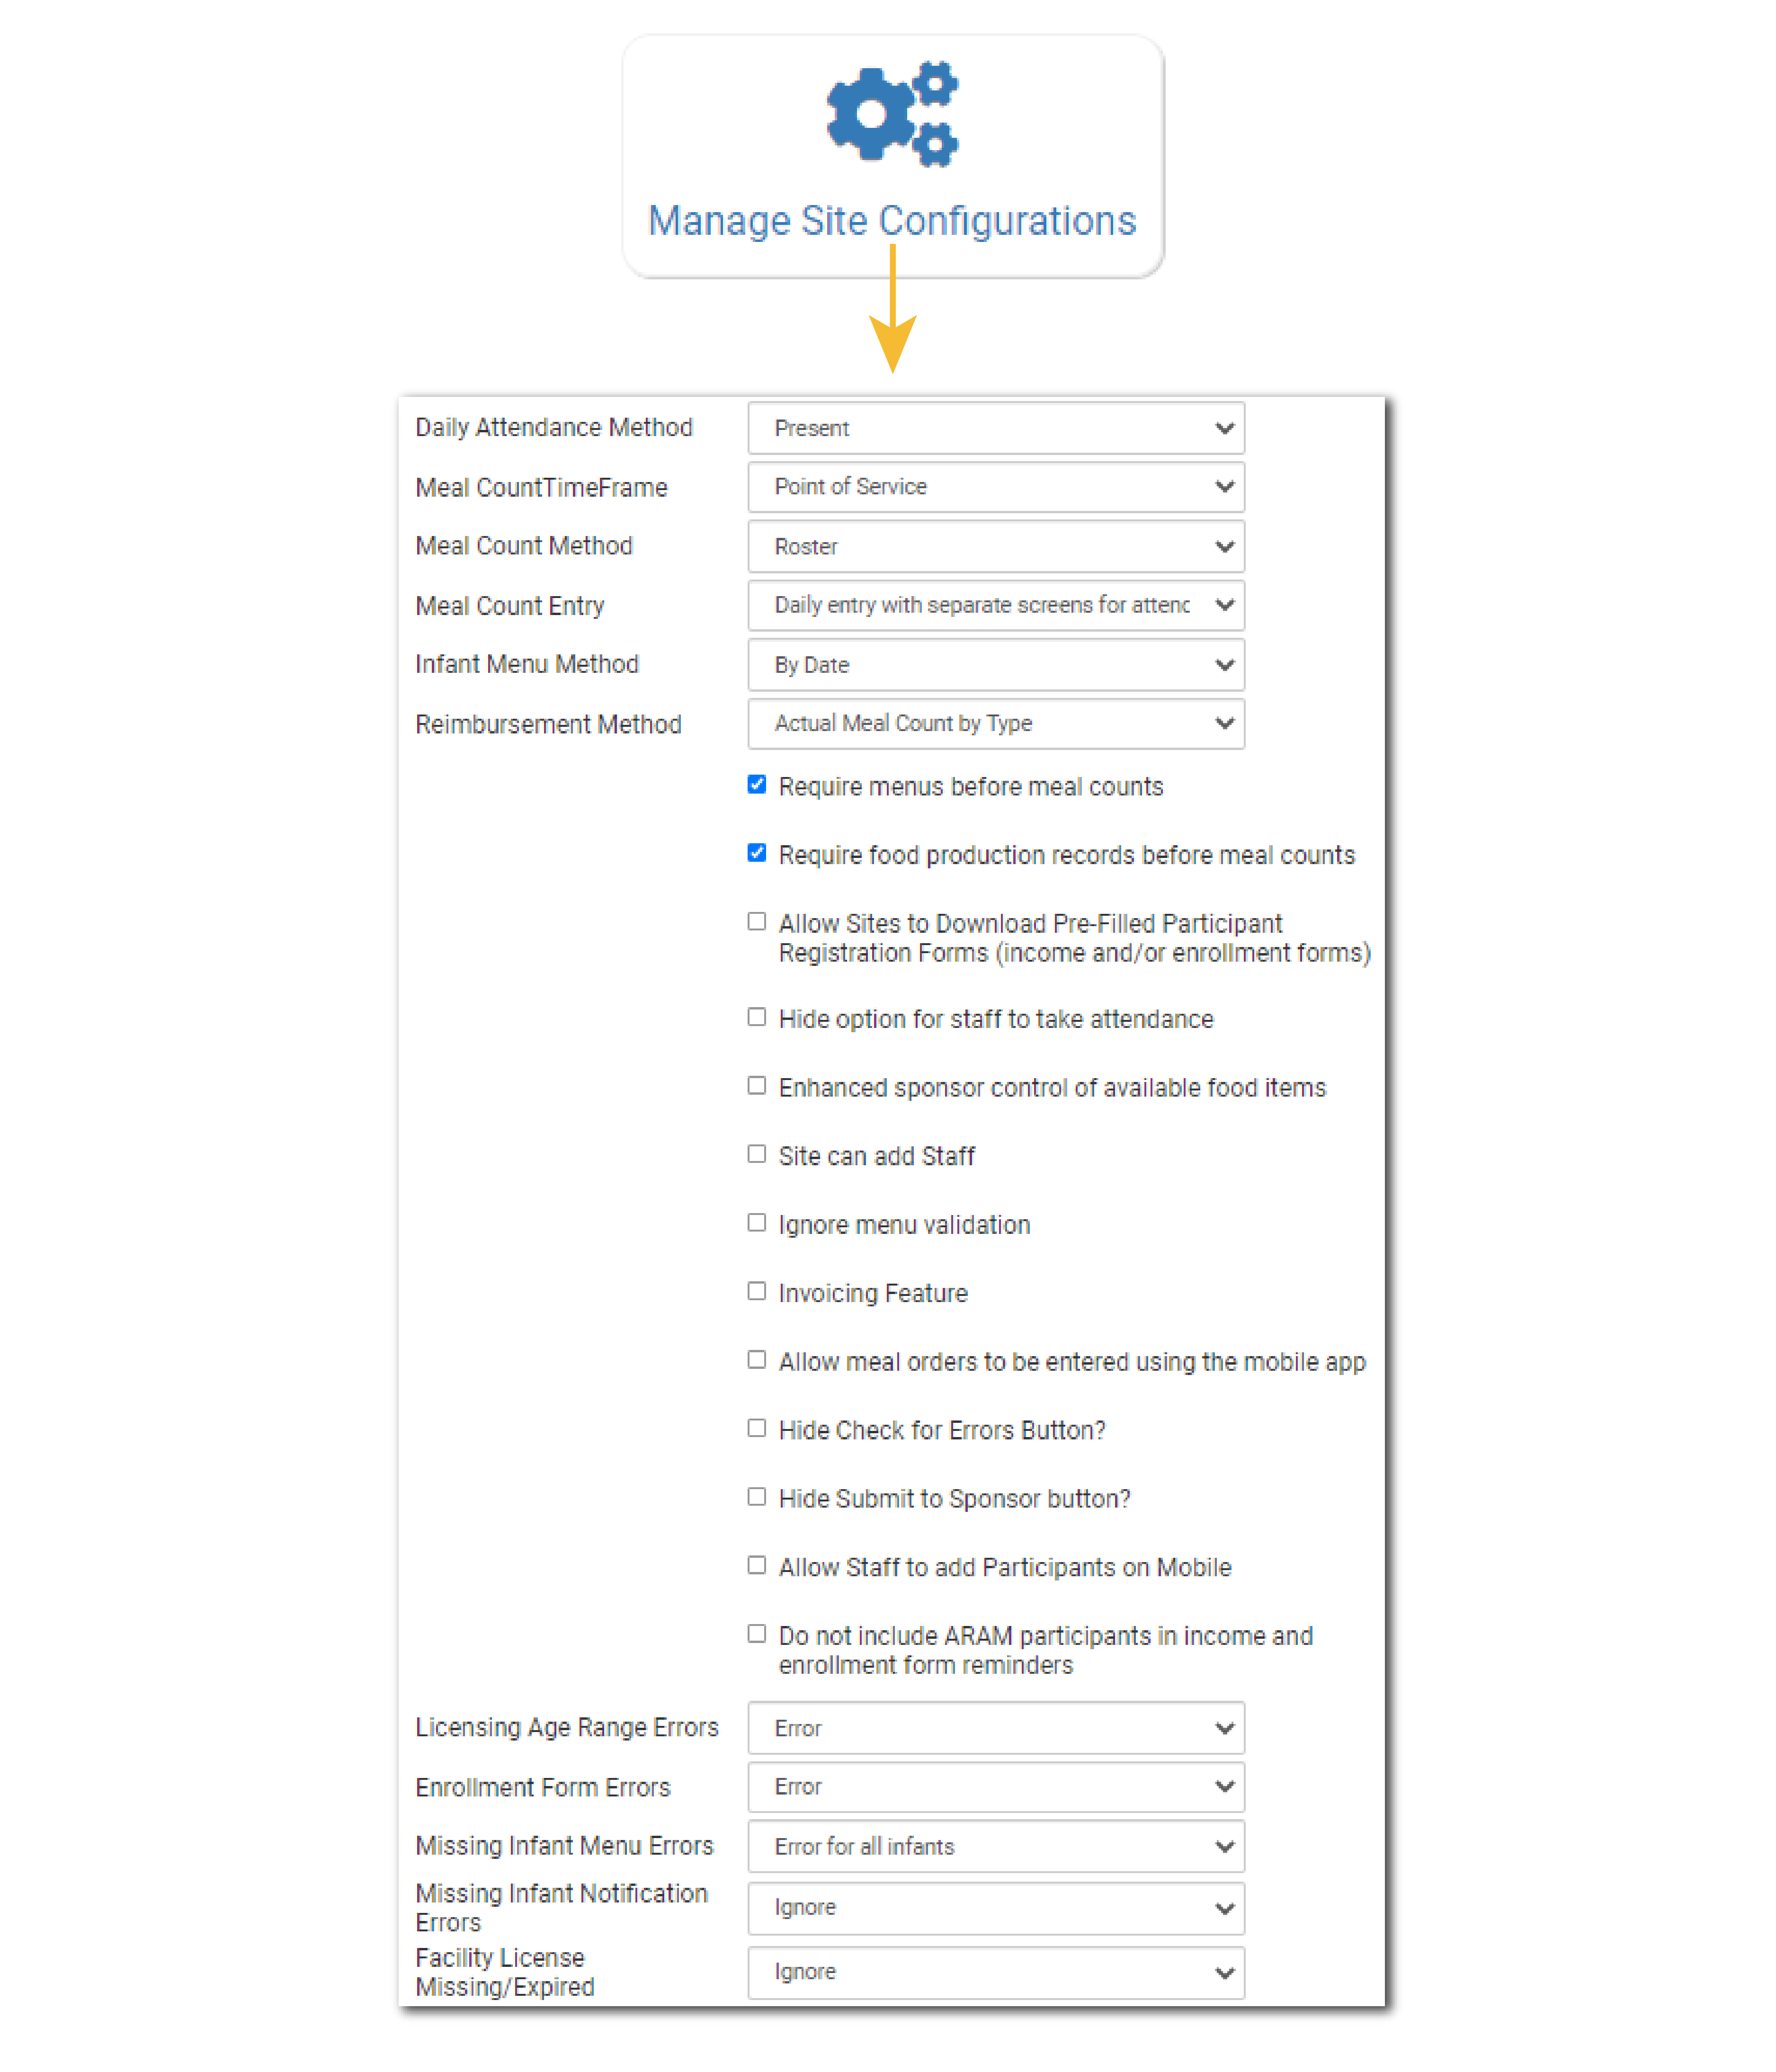 Change Settings for Existing Sites